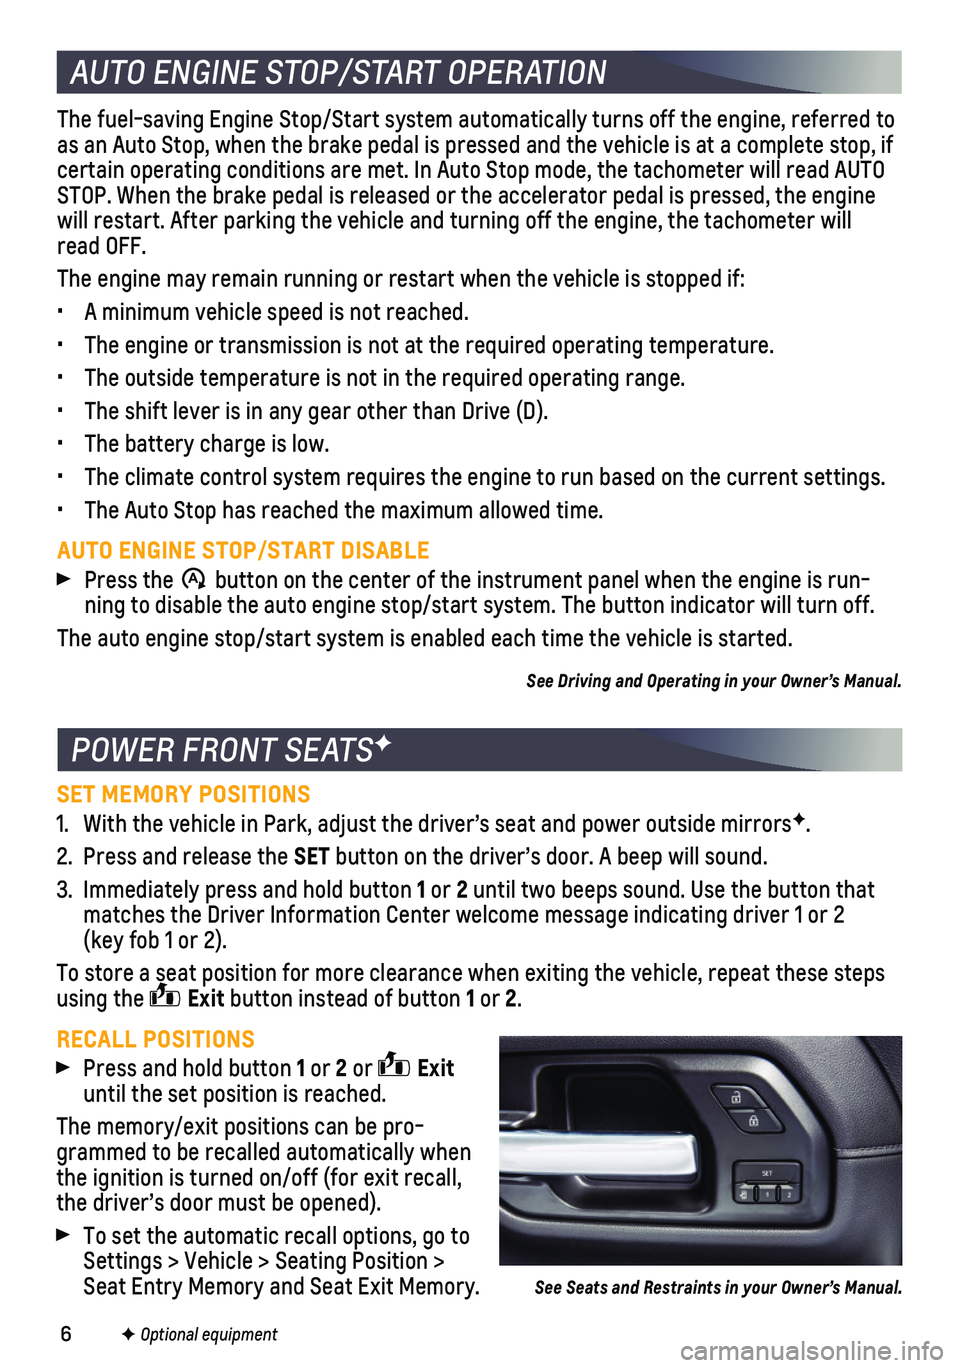 CHEVROLET SILVERADO 1500 2021  Get To Know Guide 6F Optional equipment      
AUTO ENGINE STOP/START OPERATION
The fuel-saving Engine Stop/Start system automatically turns off the eng\
ine, referred to as an Auto Stop, when the brake pedal is pressed